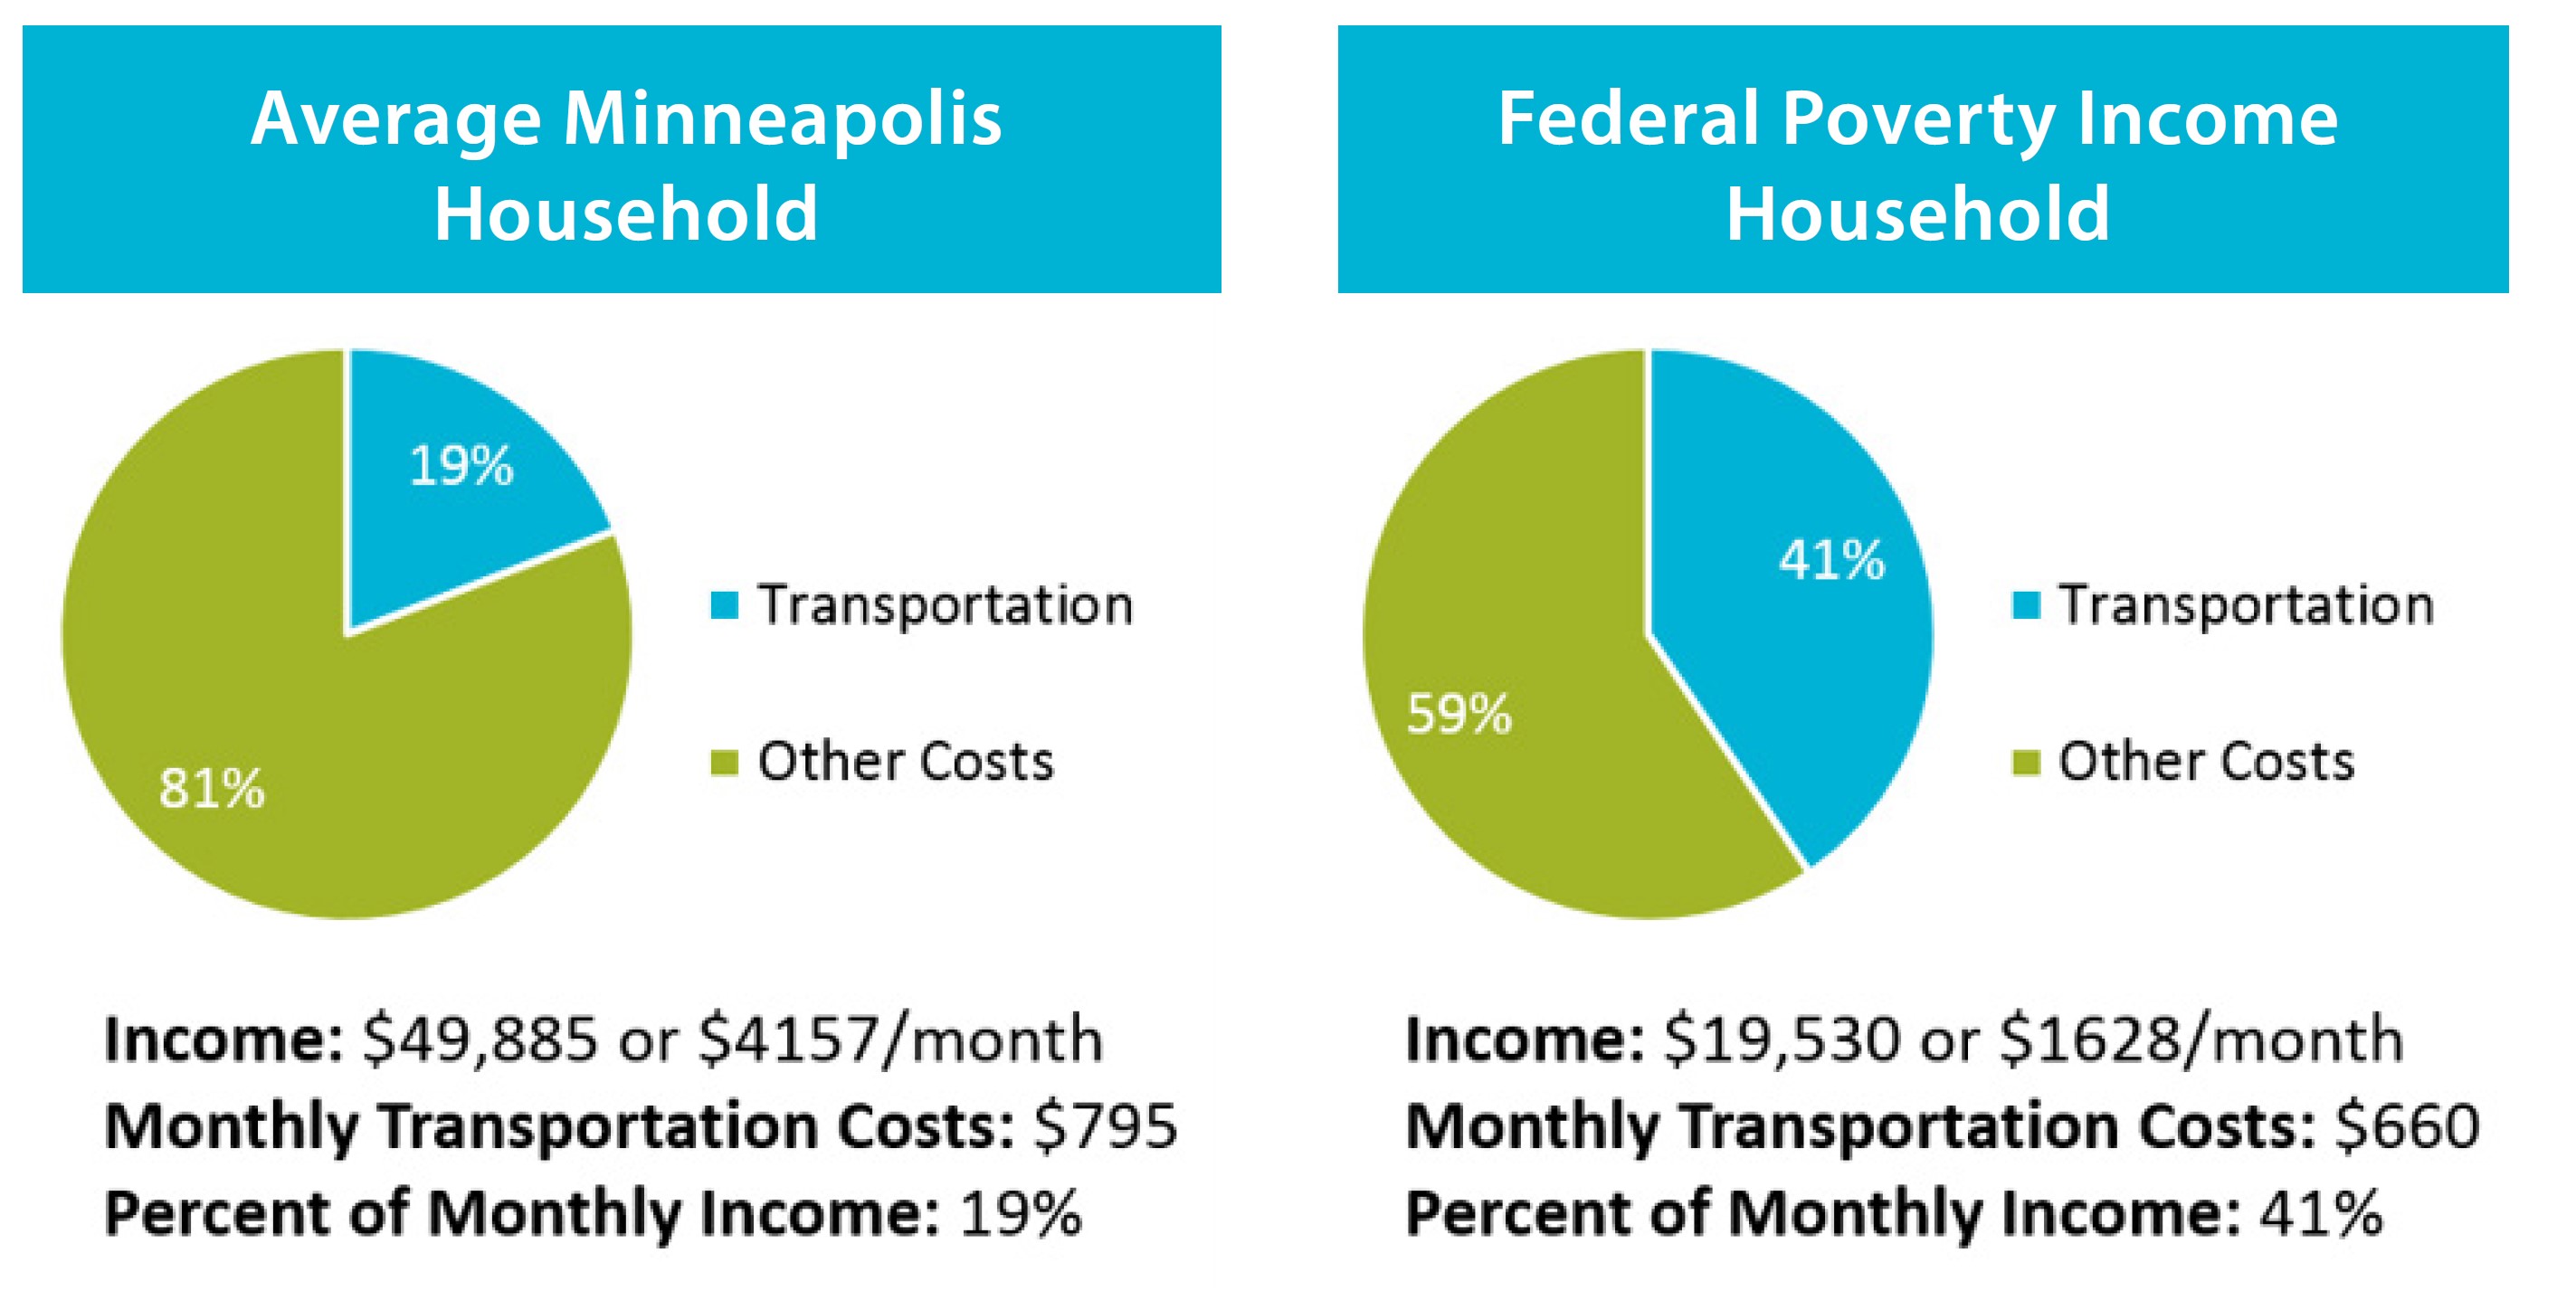 Percentage of household income spent on transportation